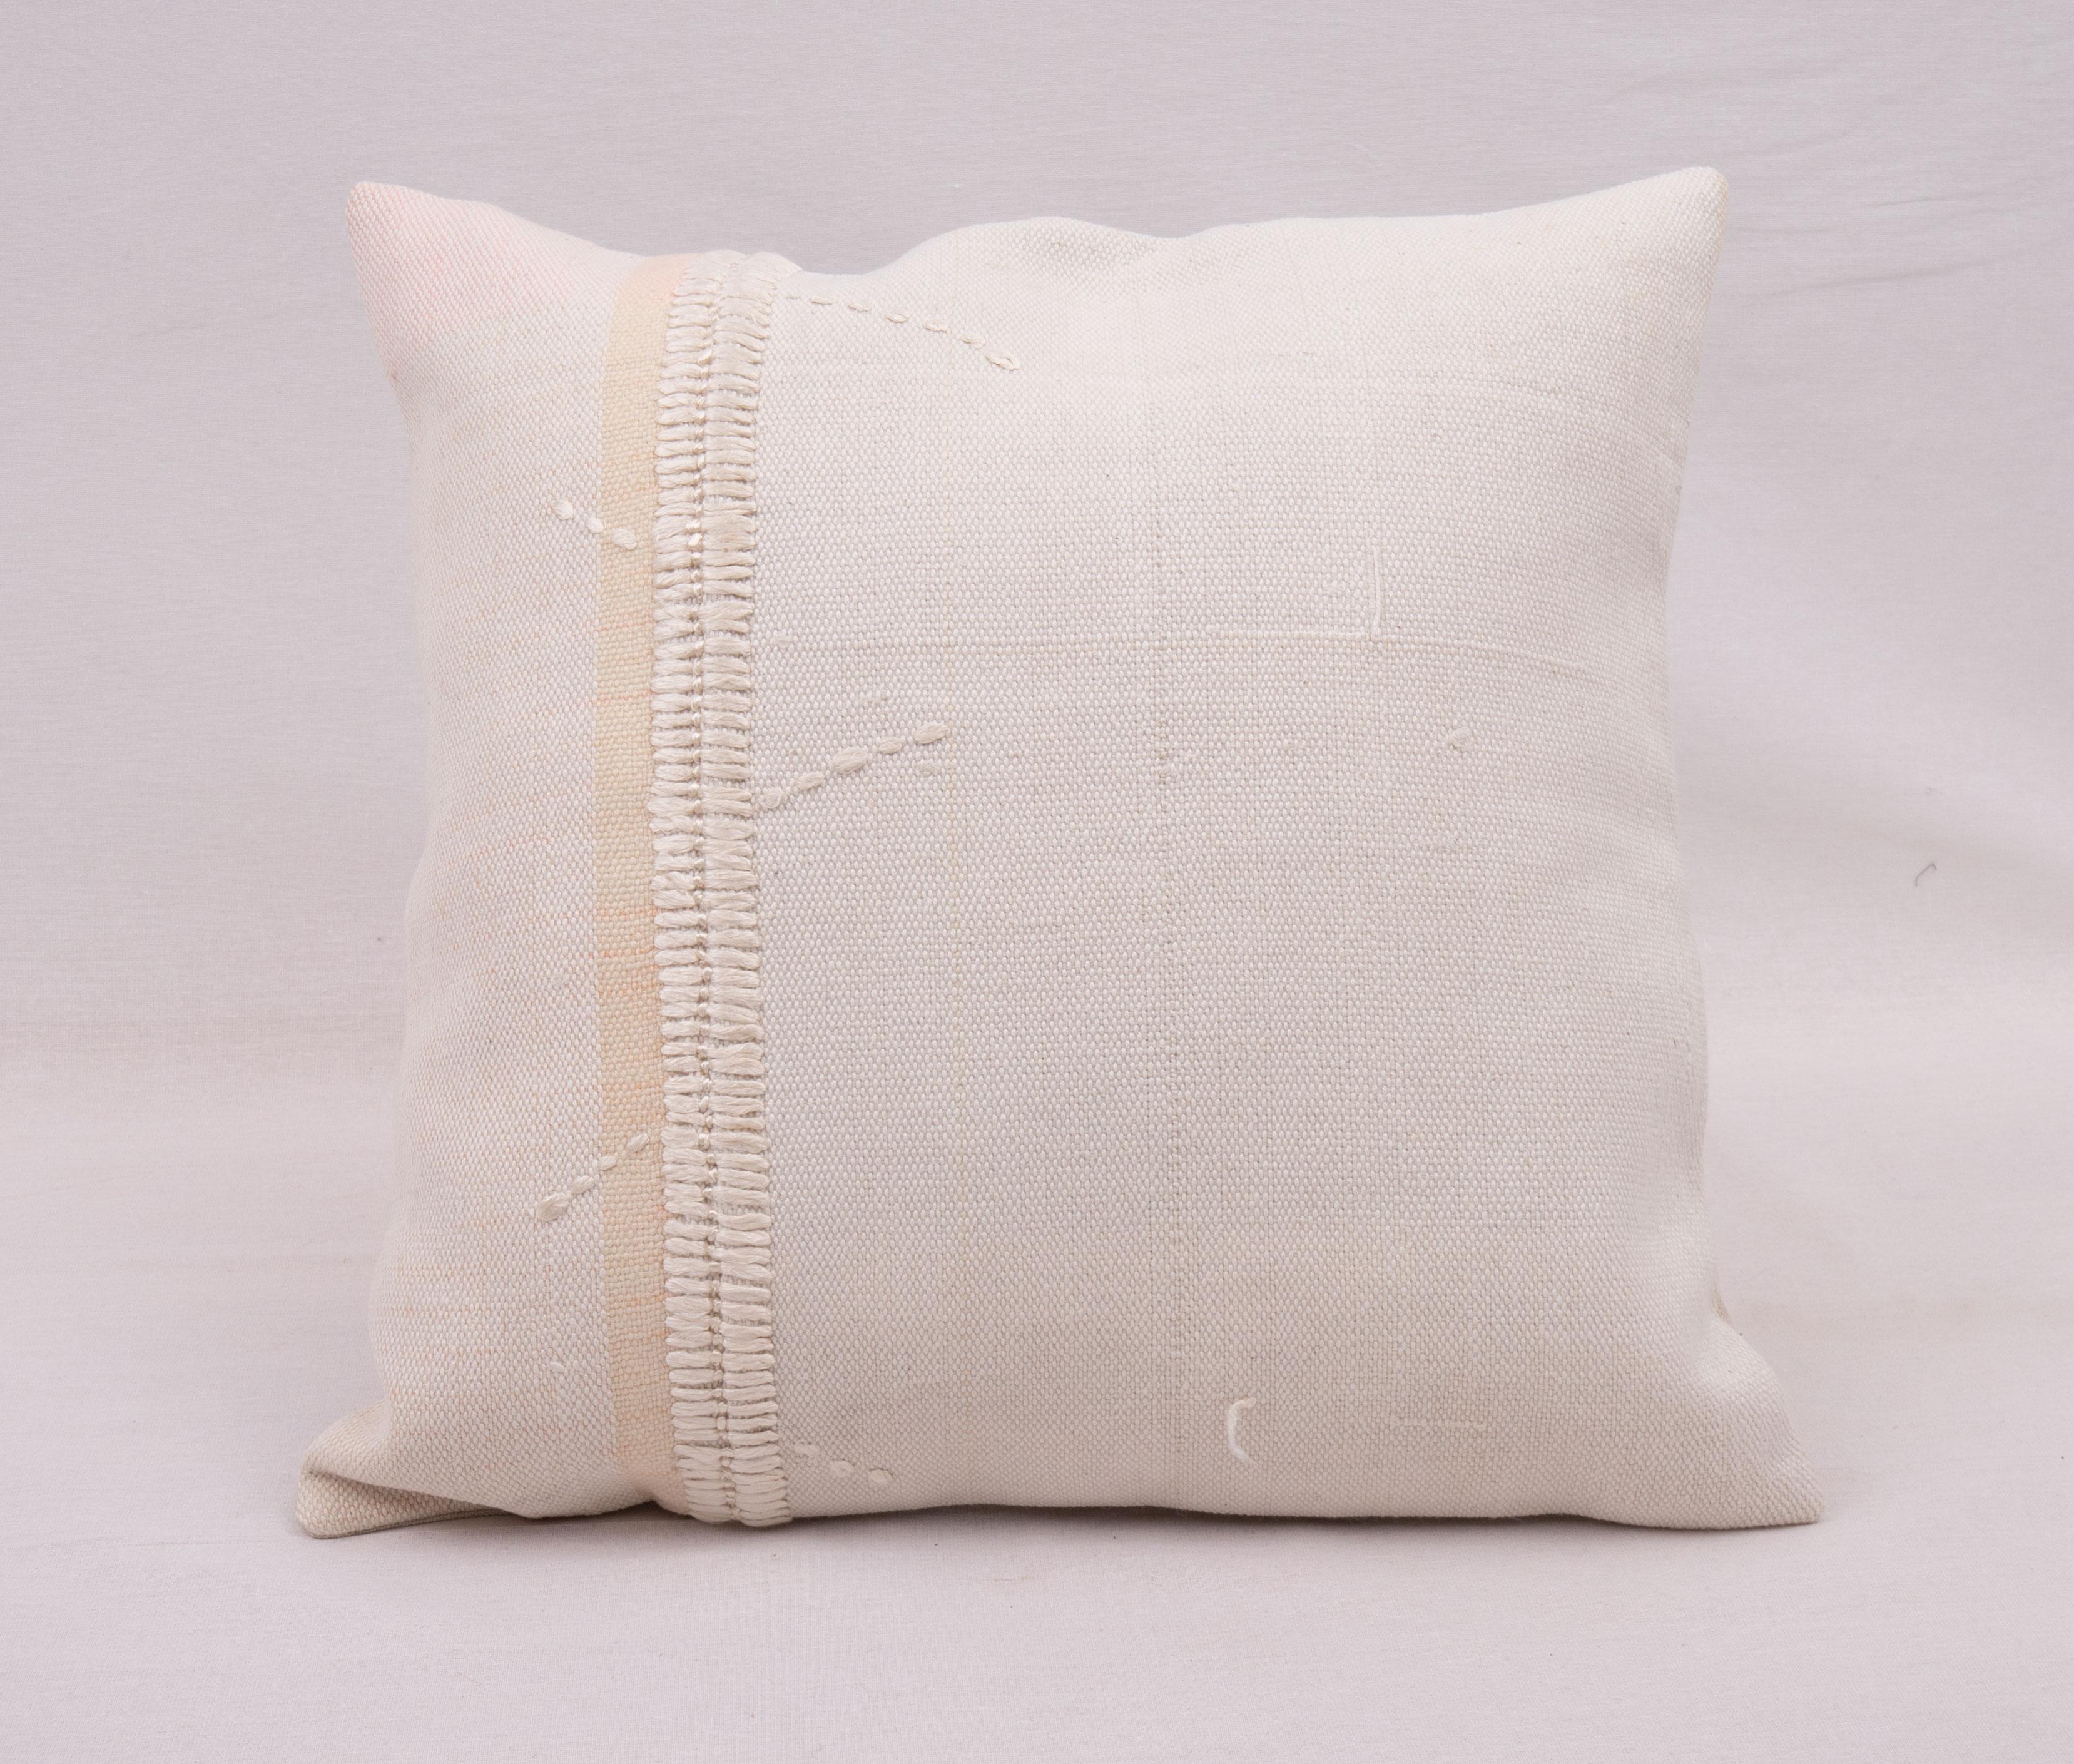 This pillow case is made from a vintage Anatolian cotton cover. Hand done silk stitching on it is our addition to the piece to give it a fine detail.

It does not come with inserts.
linen in the back.
Zipper closure.
Dry cleaning is